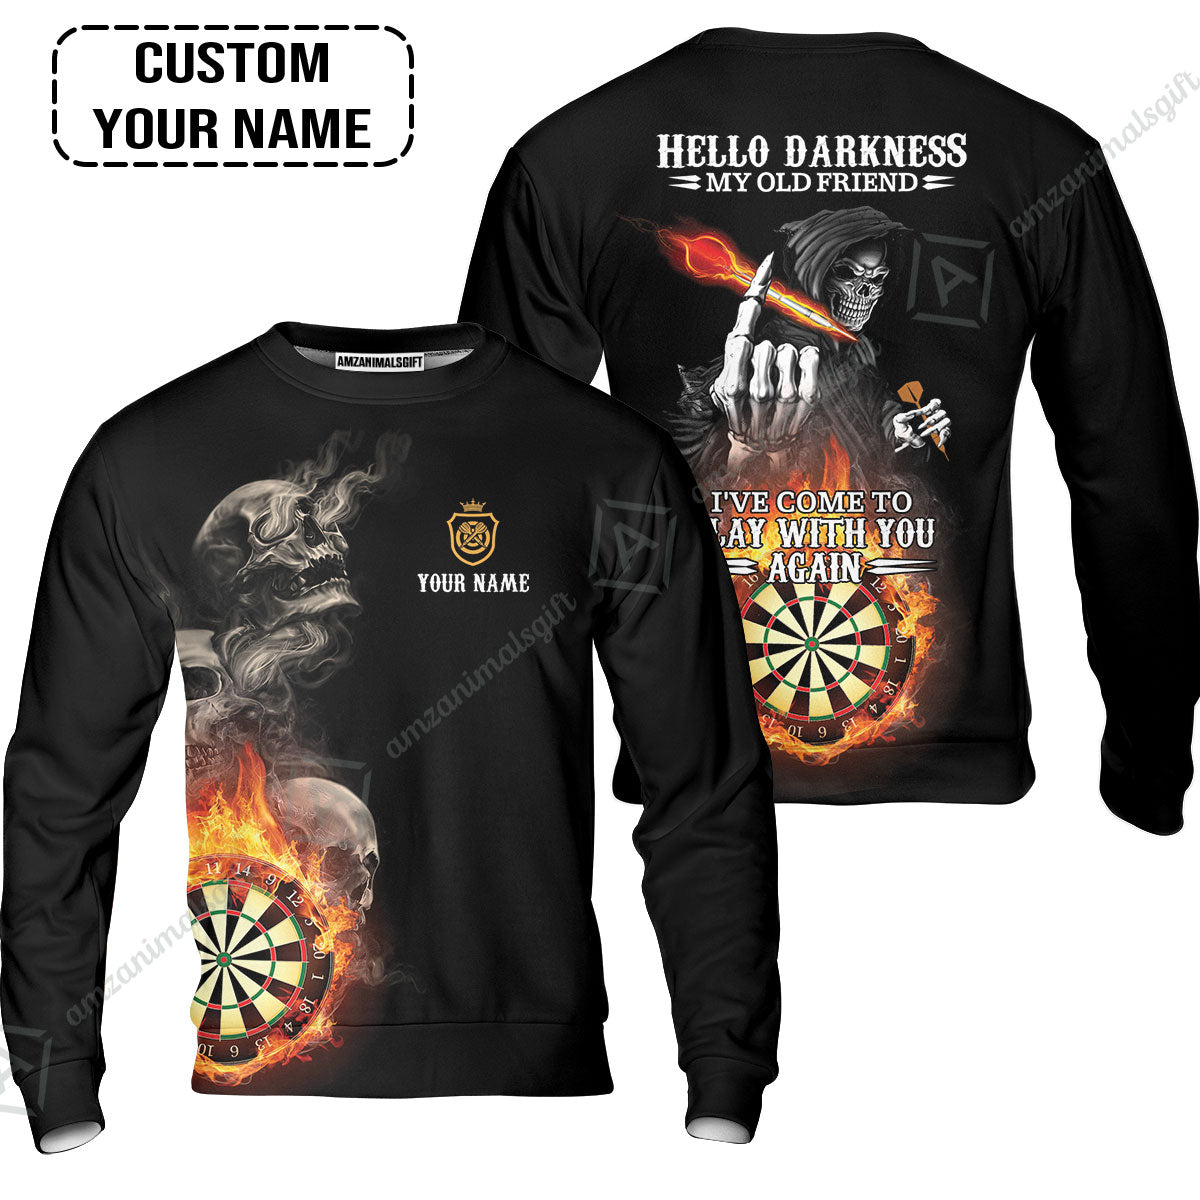 Darts Custom Name Sweatshirt, Skull Personalized Sweatshirt, Hello Darkness My Old Friend I've Come To Play With You Again